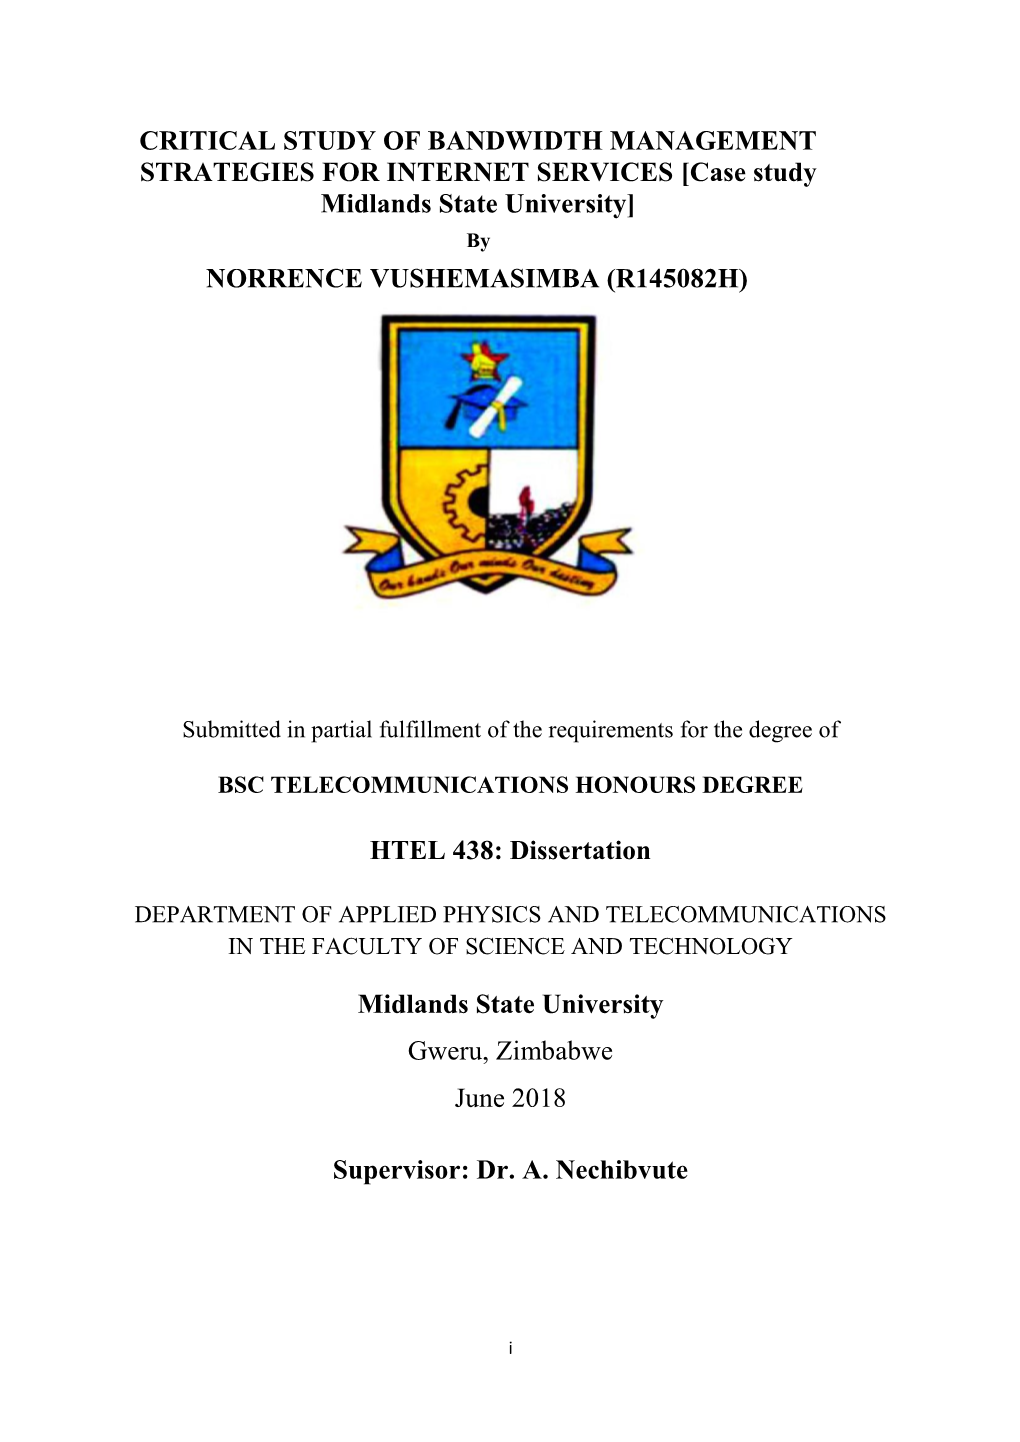 CRITICAL STUDY of BANDWIDTH MANAGEMENT STRATEGIES for INTERNET SERVICES [Case Study Midlands State University] by NORRENCE VUSHEMASIMBA (R145082H)